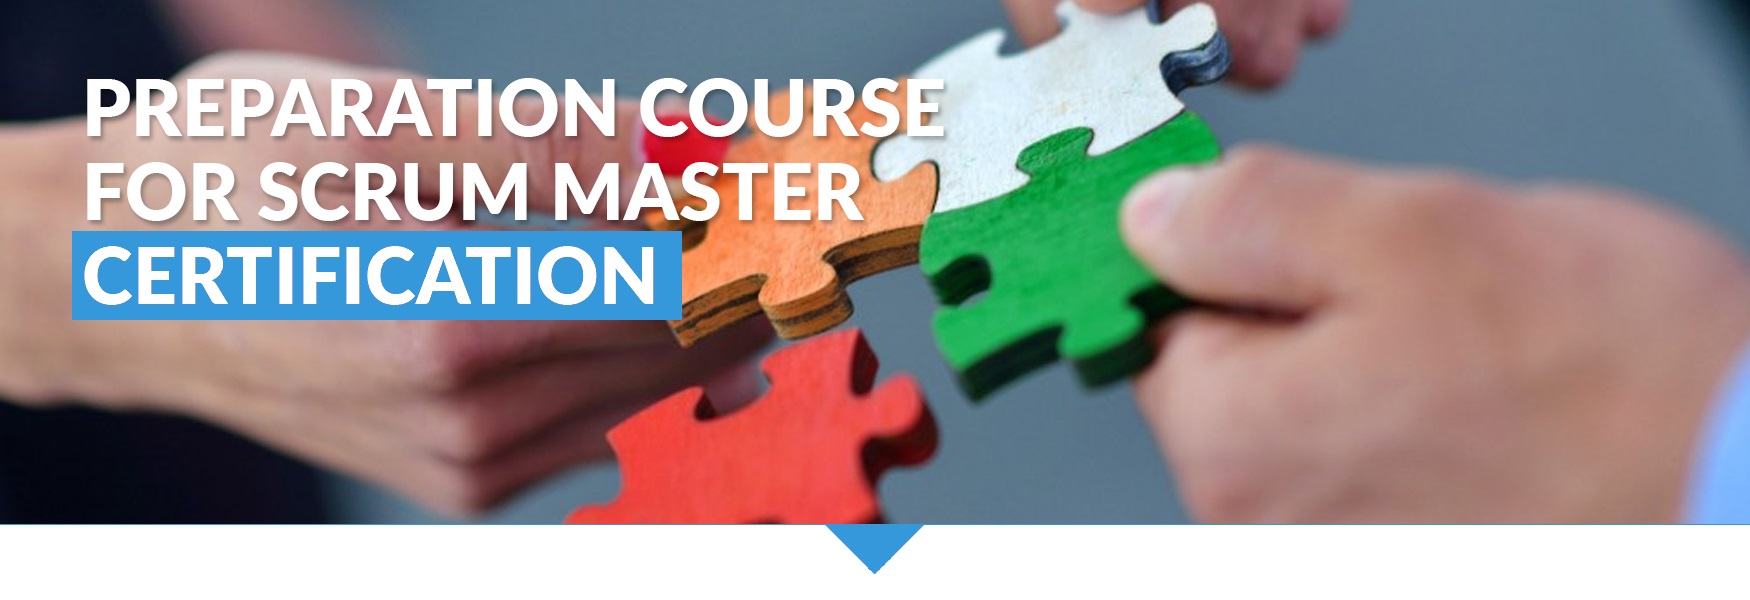 Preparation Course for Scrum Master Certification (March, 2021 )